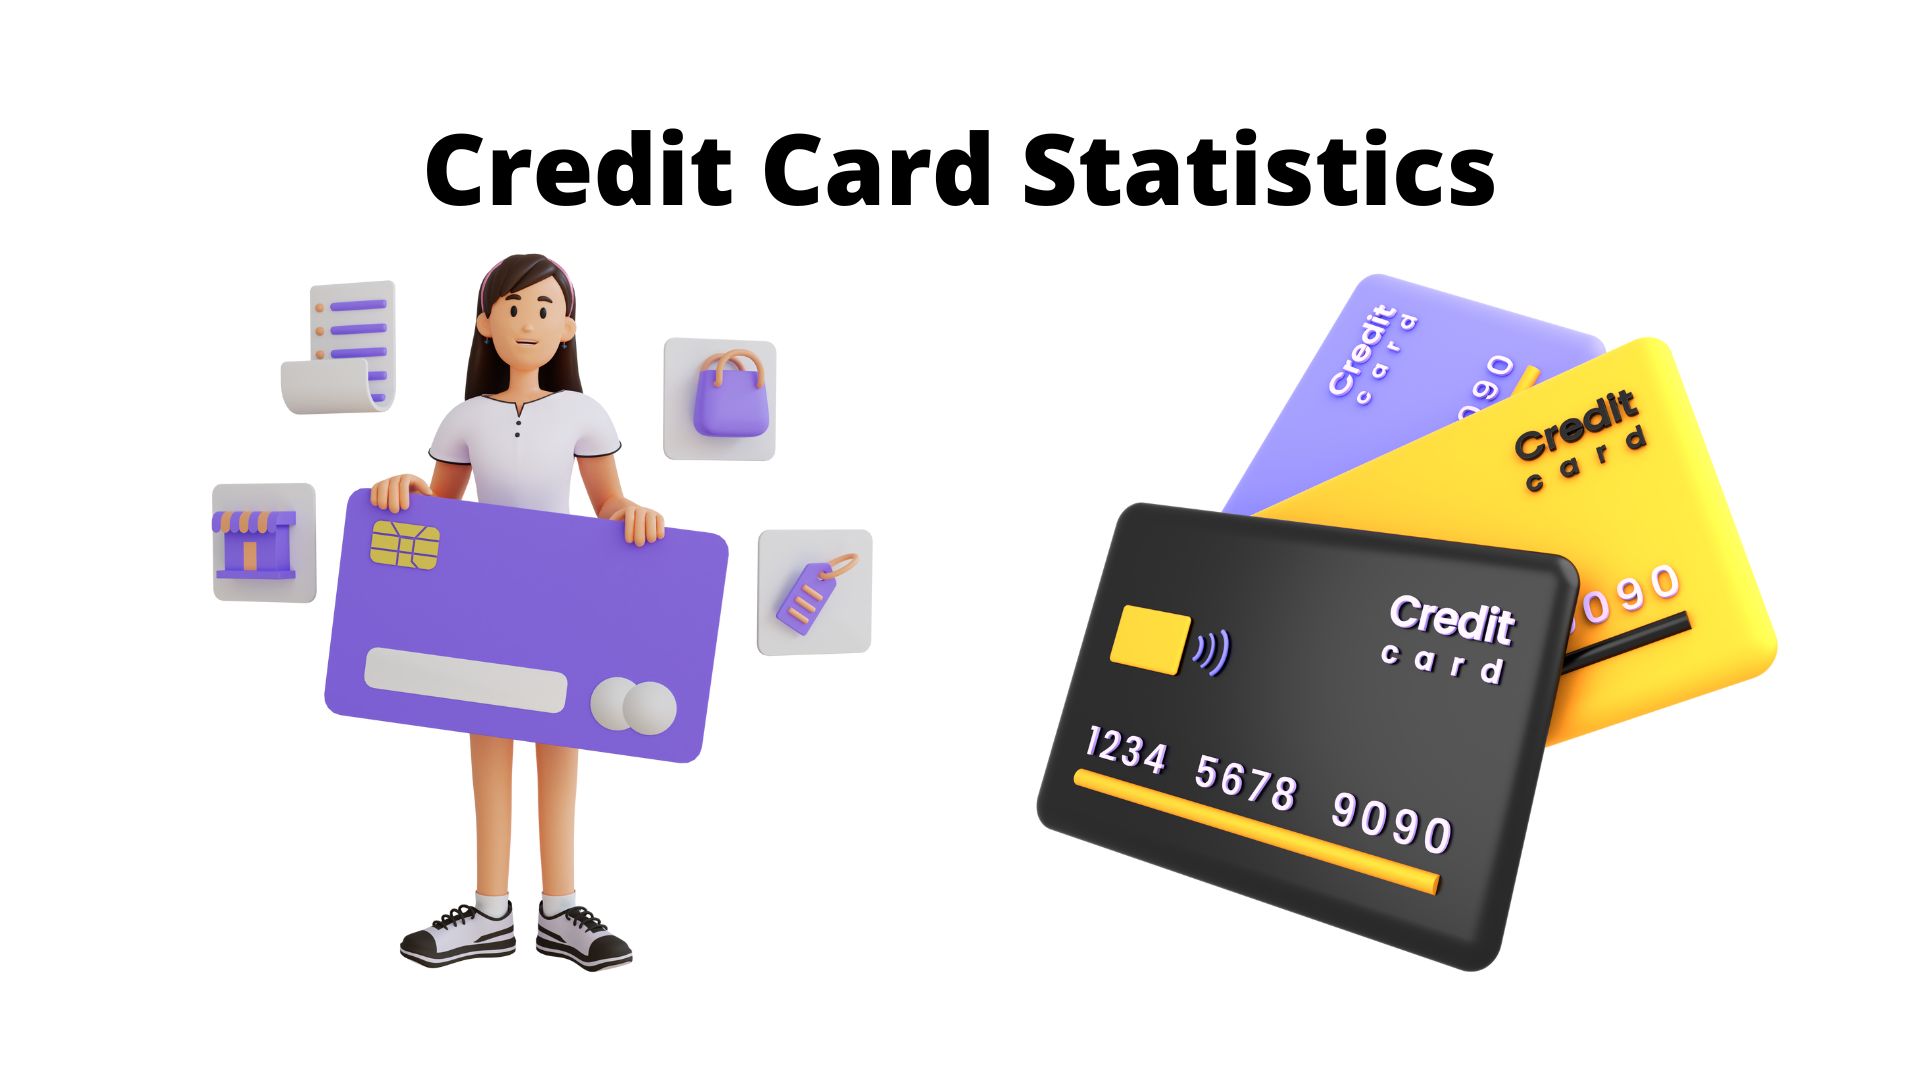 Most Crucial Credit Card Statistics And Trends For 2022 To Show The Growth